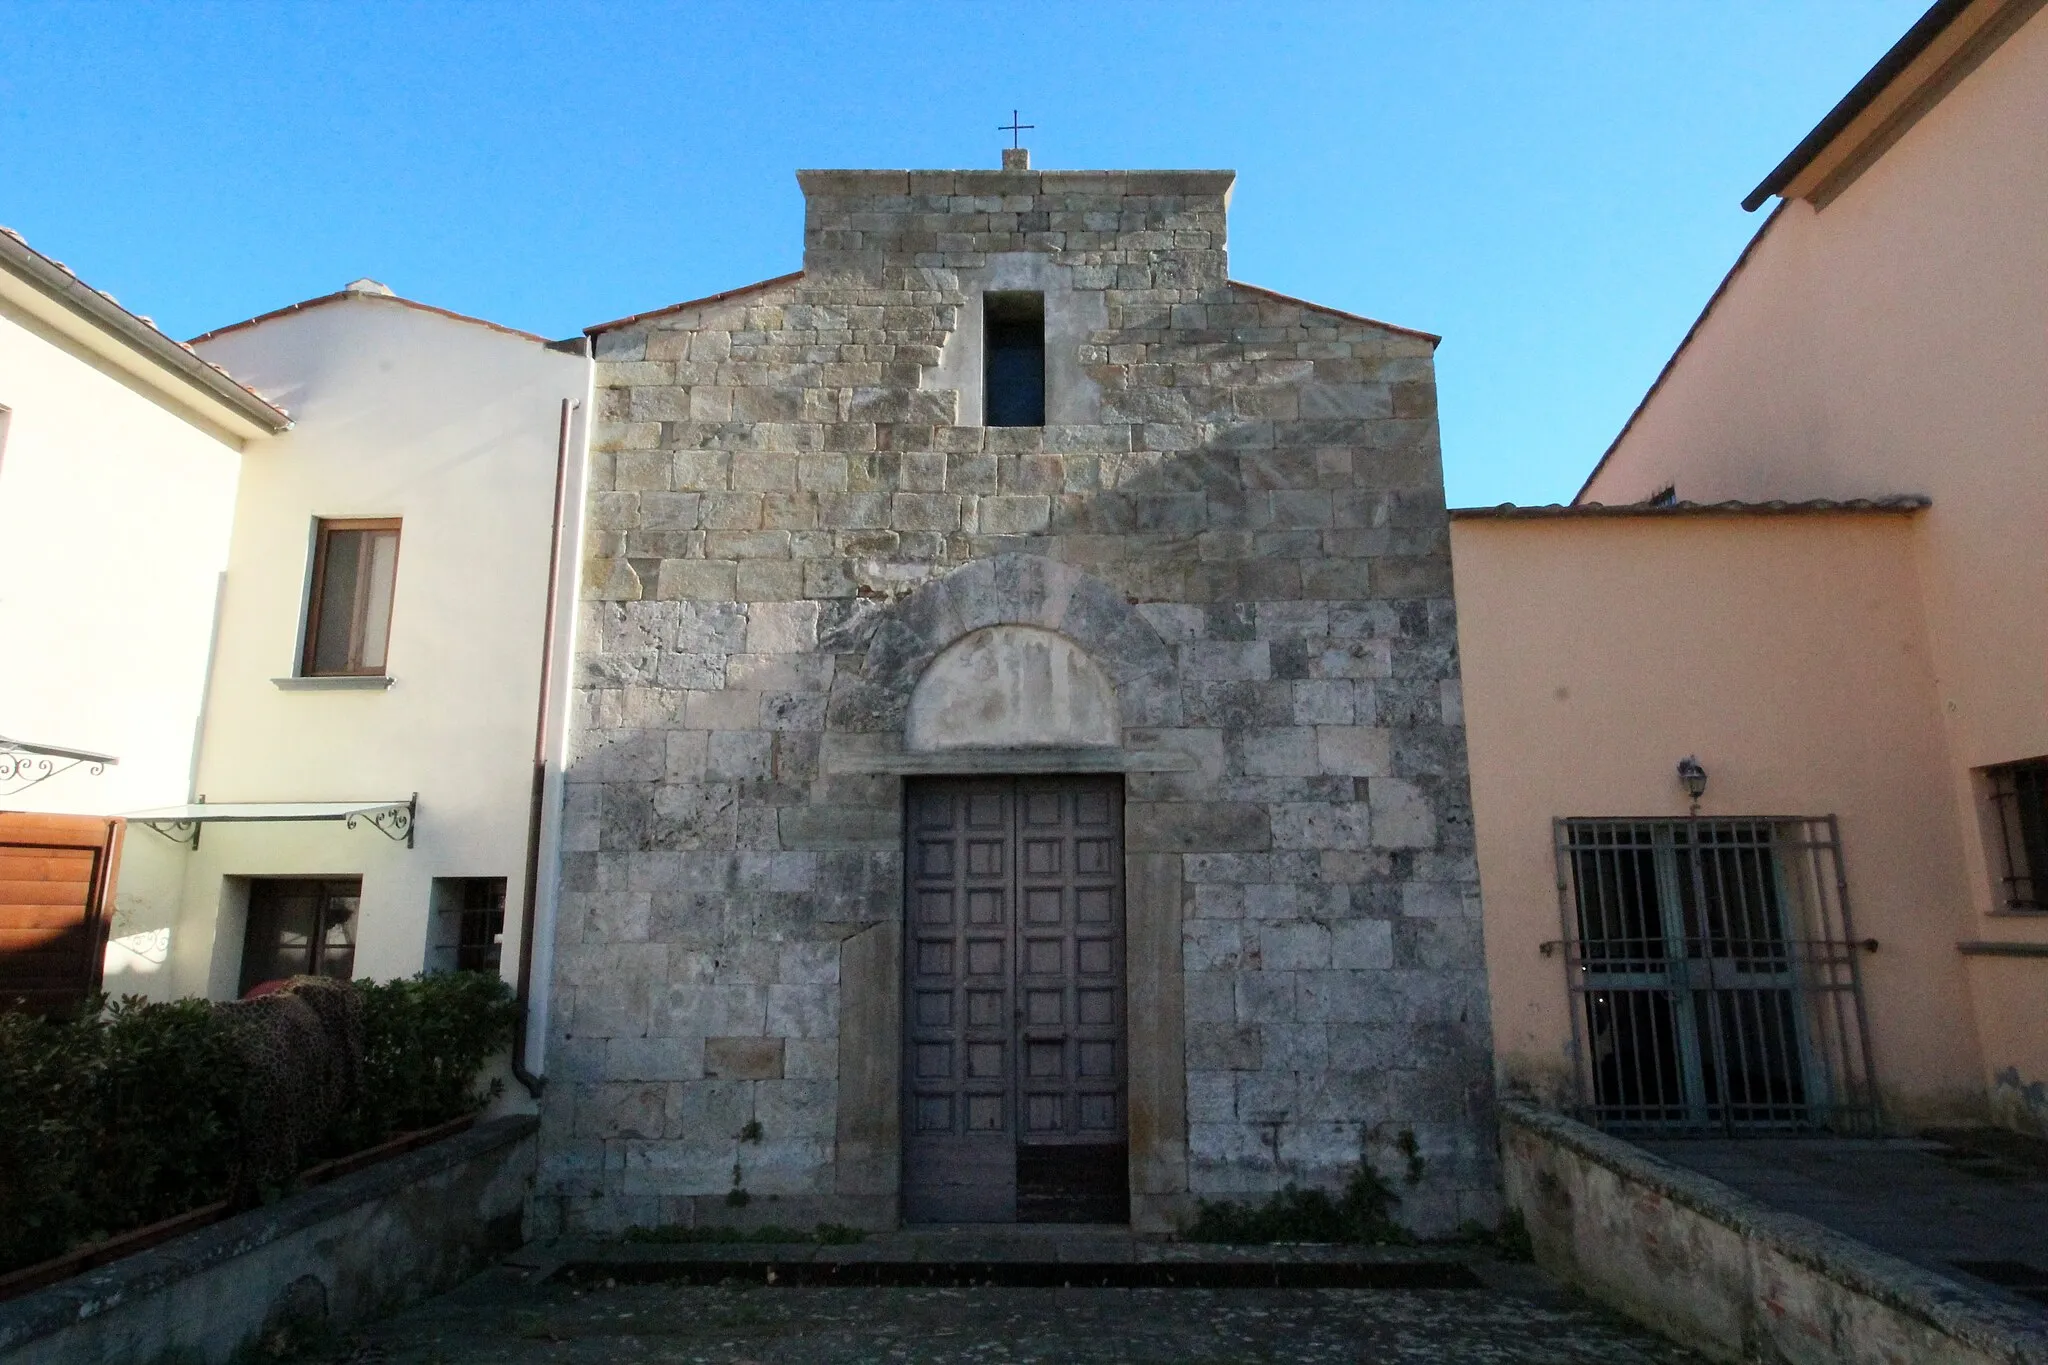 Photo showing: Santa Jacopo, also called San Torpè, Church in Zambra, hamlet of Cascina, Province of Pisa, Tuscany, Italy